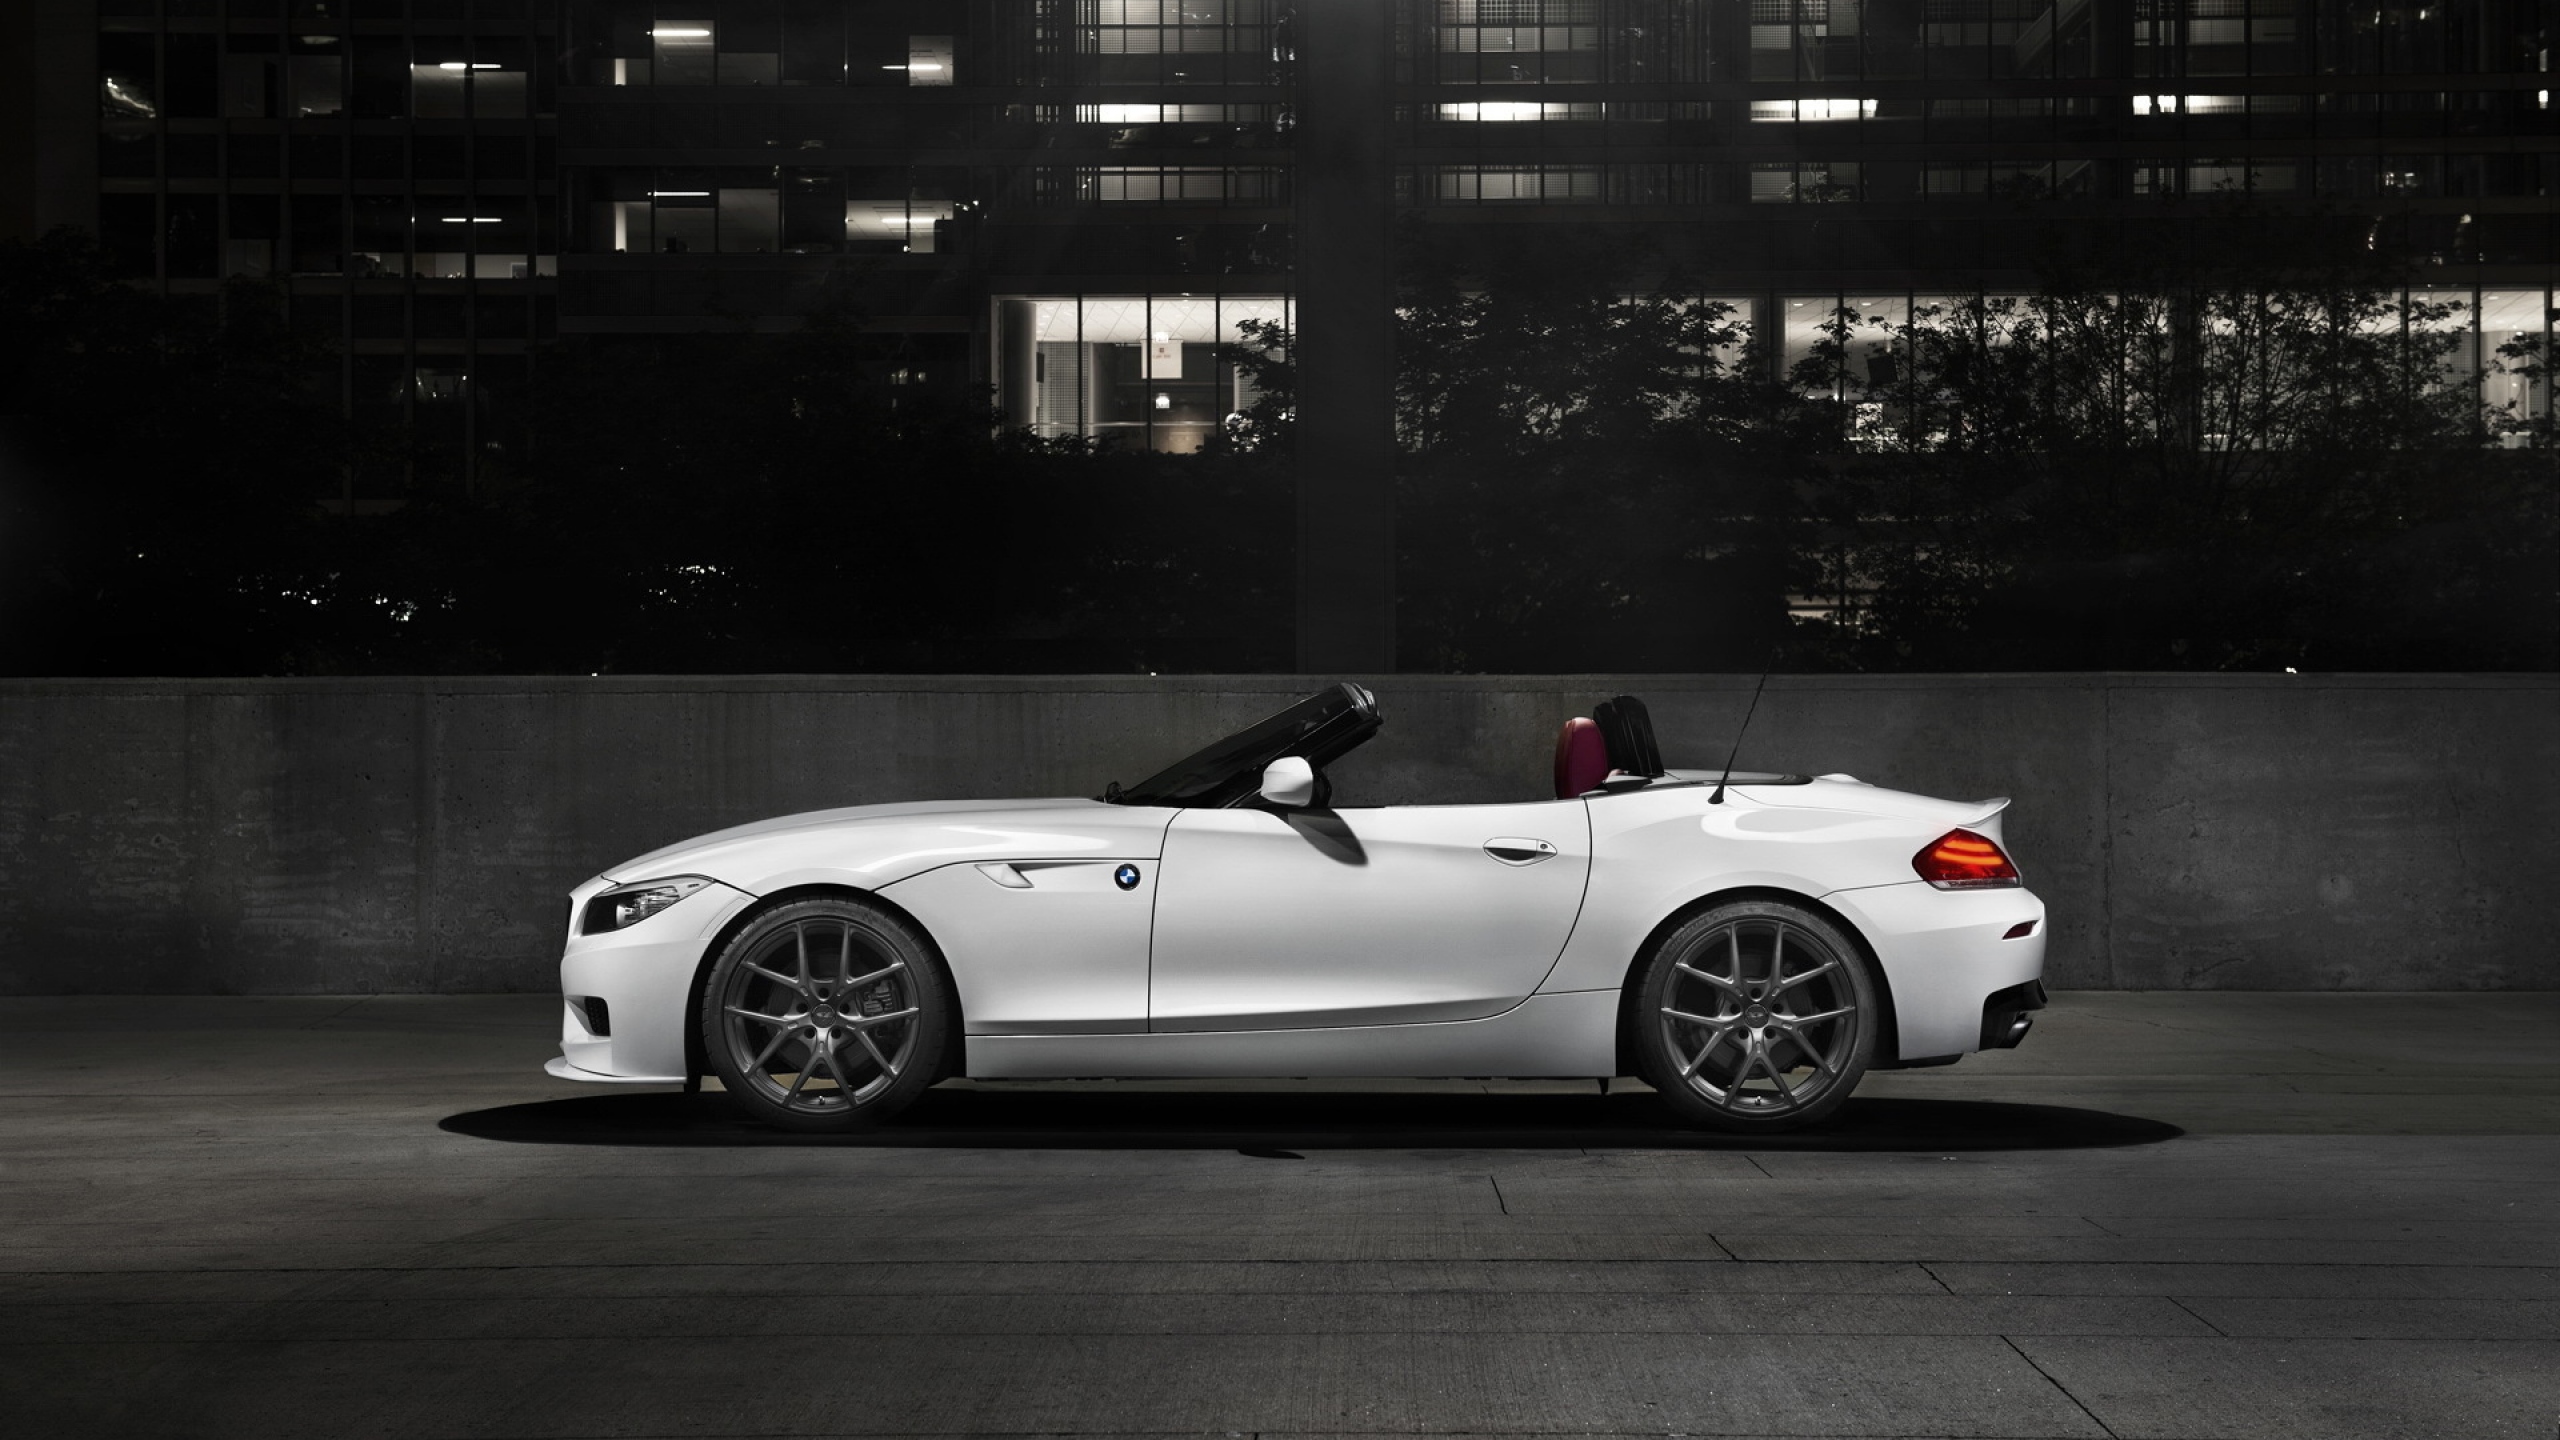 Free Download Download Wallpaper 2560x1440 Roadster Auto Bmw Car Bmw 2560x1440 For Your Desktop Mobile Tablet Explore 99 Bmw Z4 Roadster Wallpapers Bmw Z4 Roadster Wallpapers Bmw Z4 Wallpaper